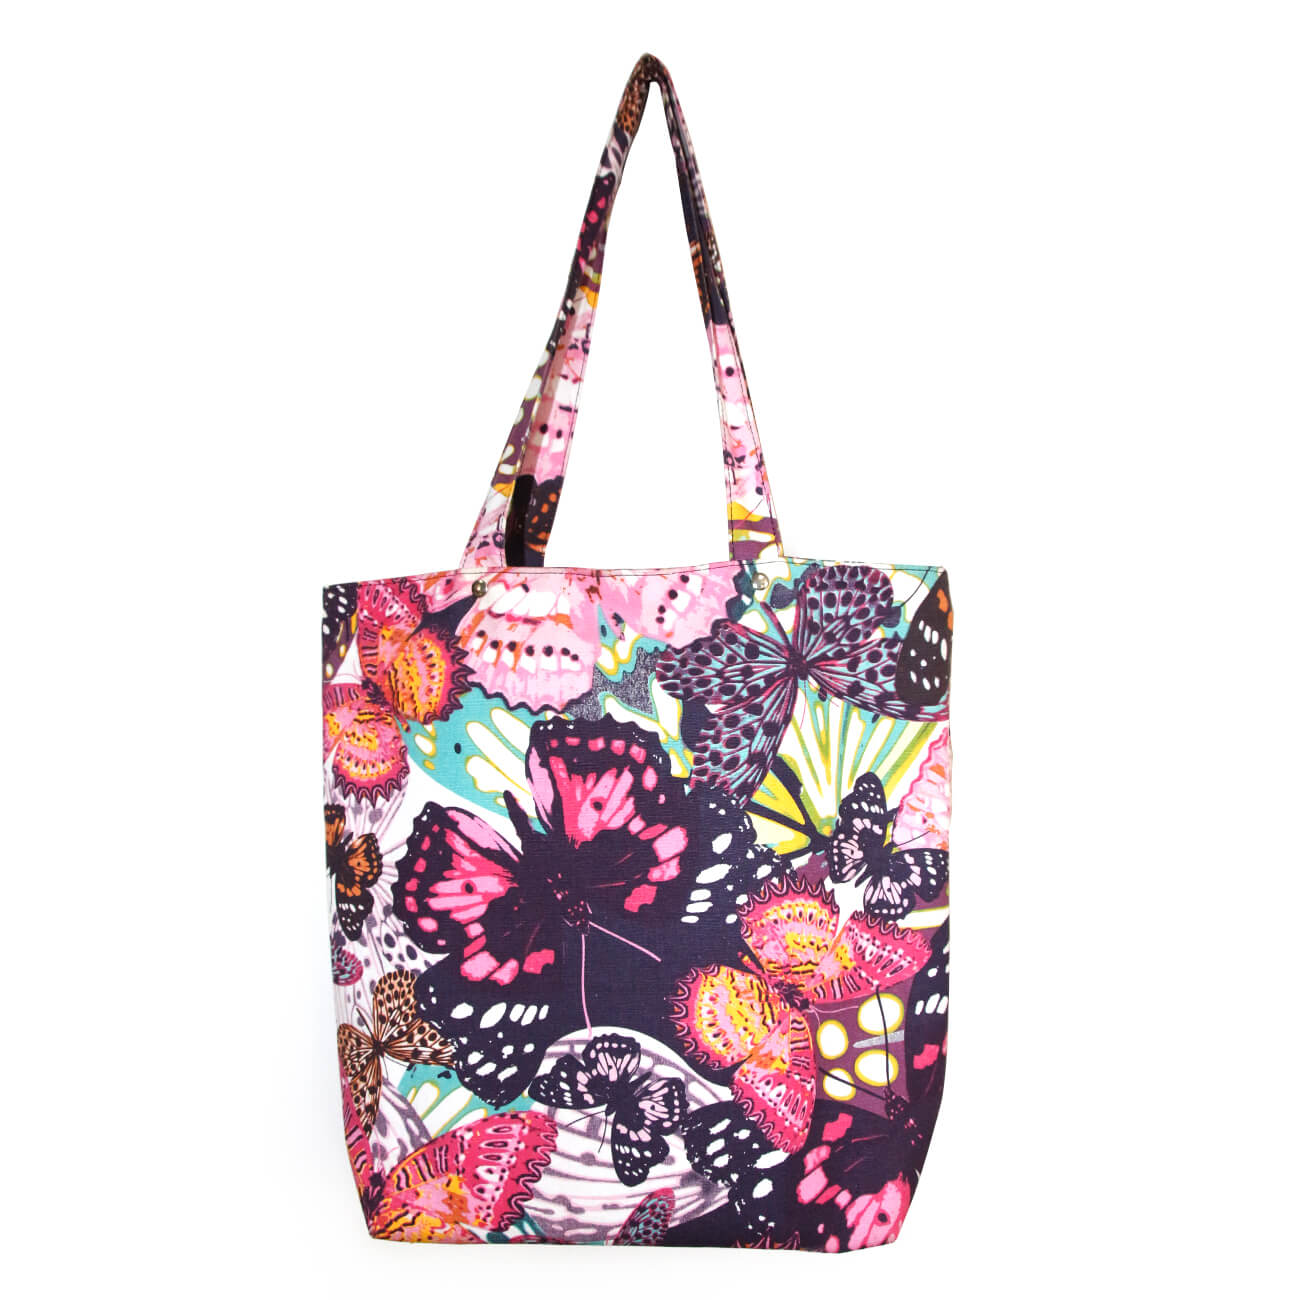 Customized Reusable 600d Polyester Tote Bag 